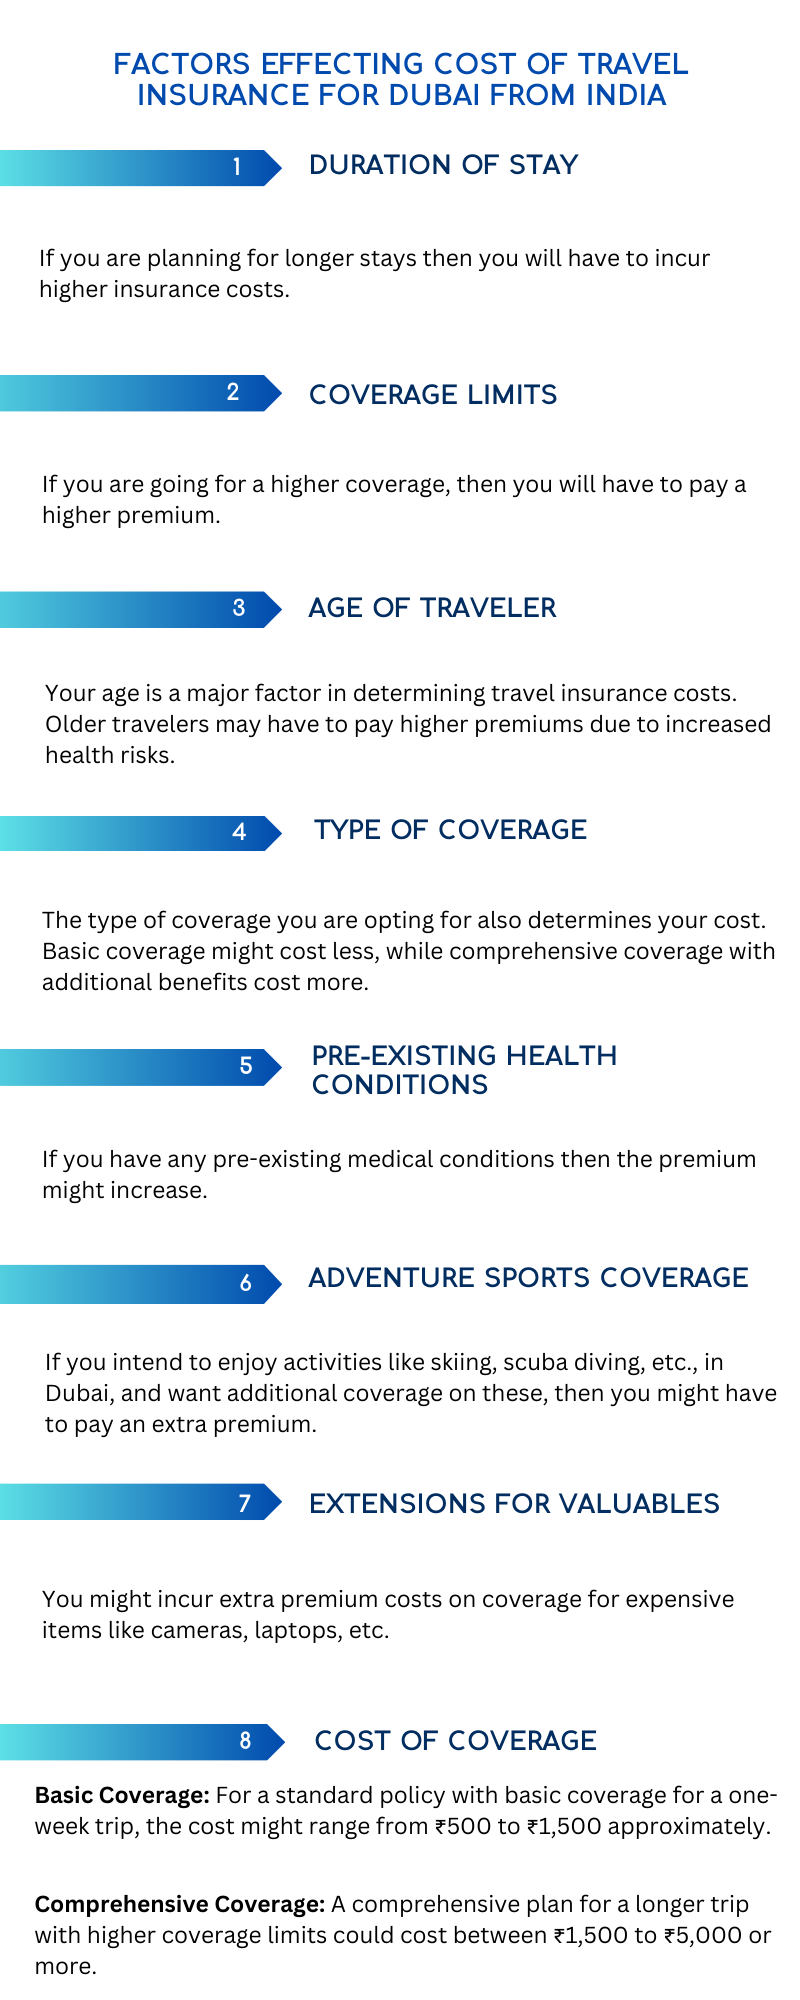 FACTORS AFFECTING COST OF TRAVEL INSURANCE FOR DUBAI FROM INDIA